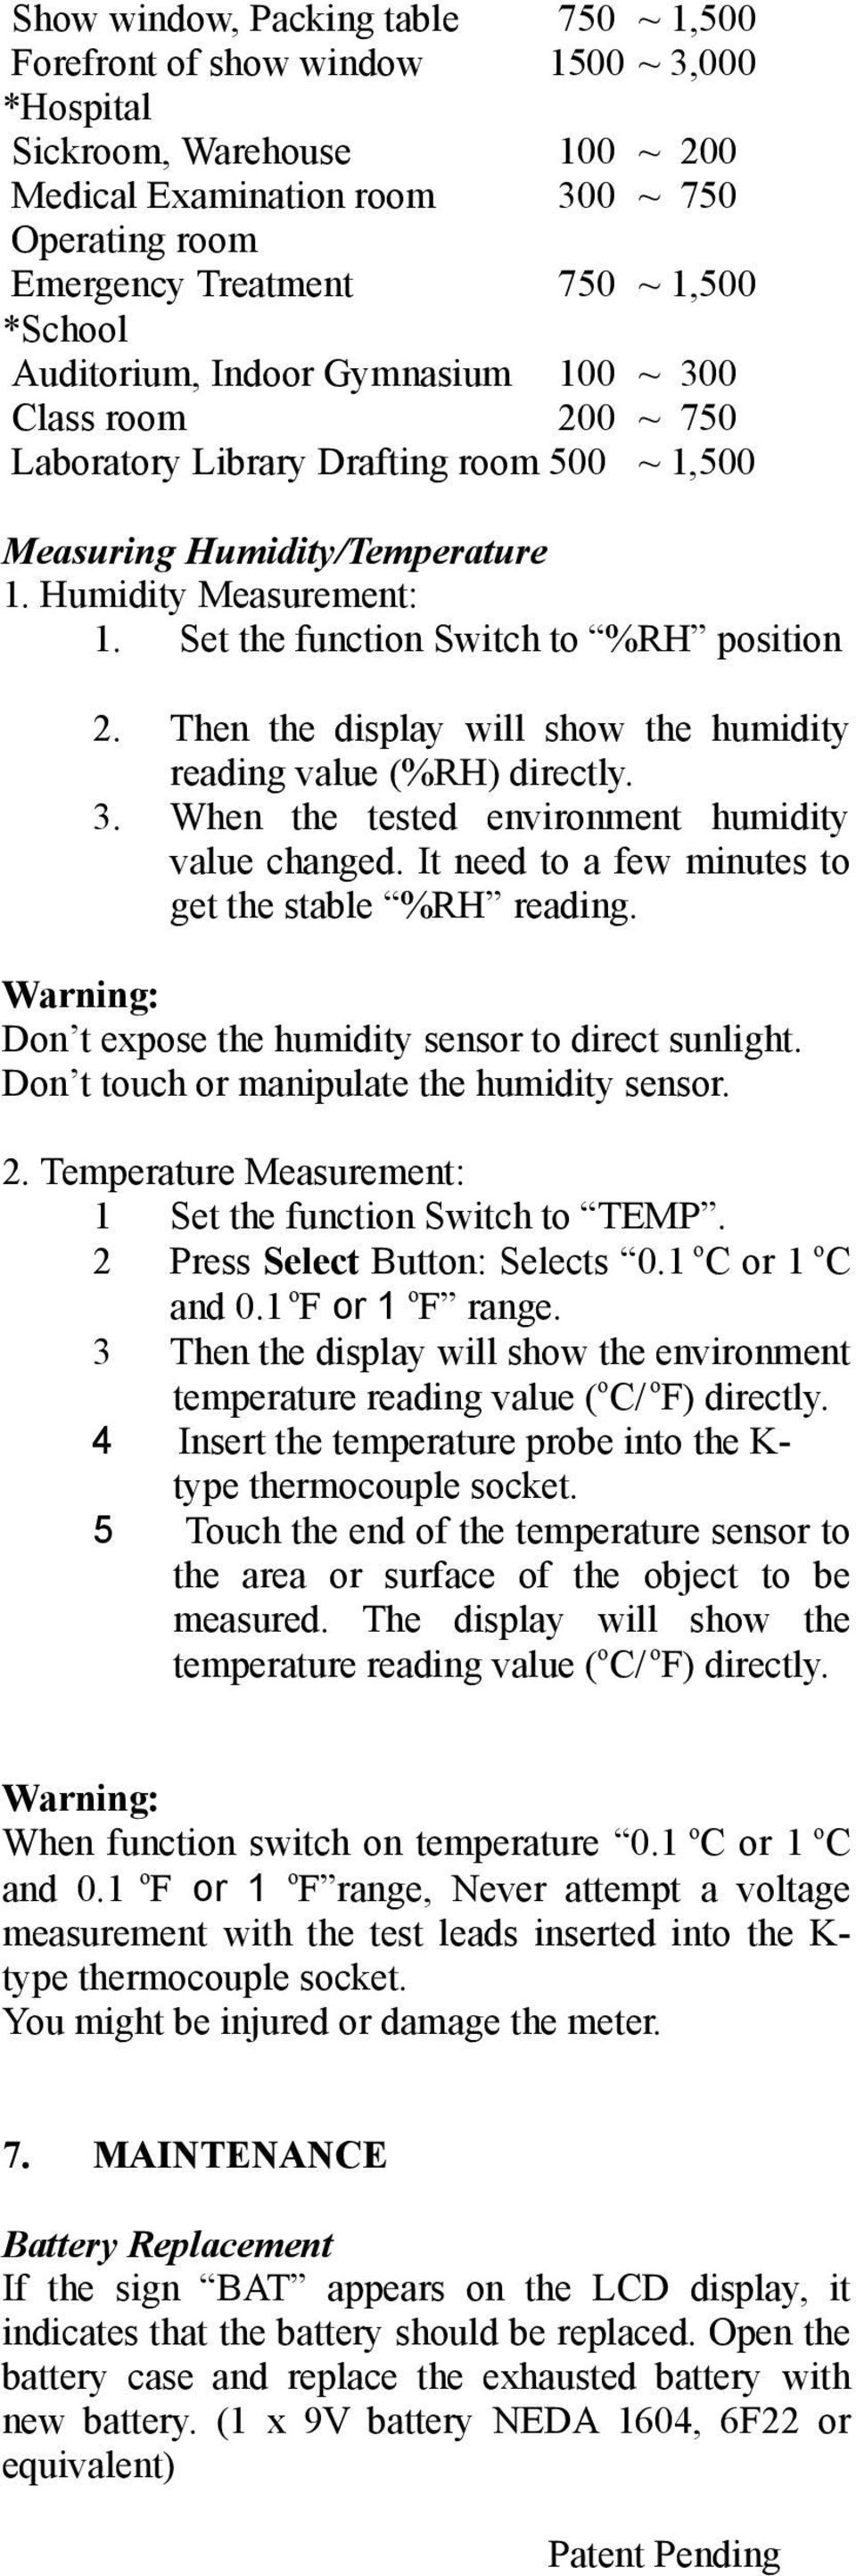 Set the function Switch to %RH position 2. Then the display will show the humidity reading value (%RH) directly. 3. When the tested environment humidity value changed.